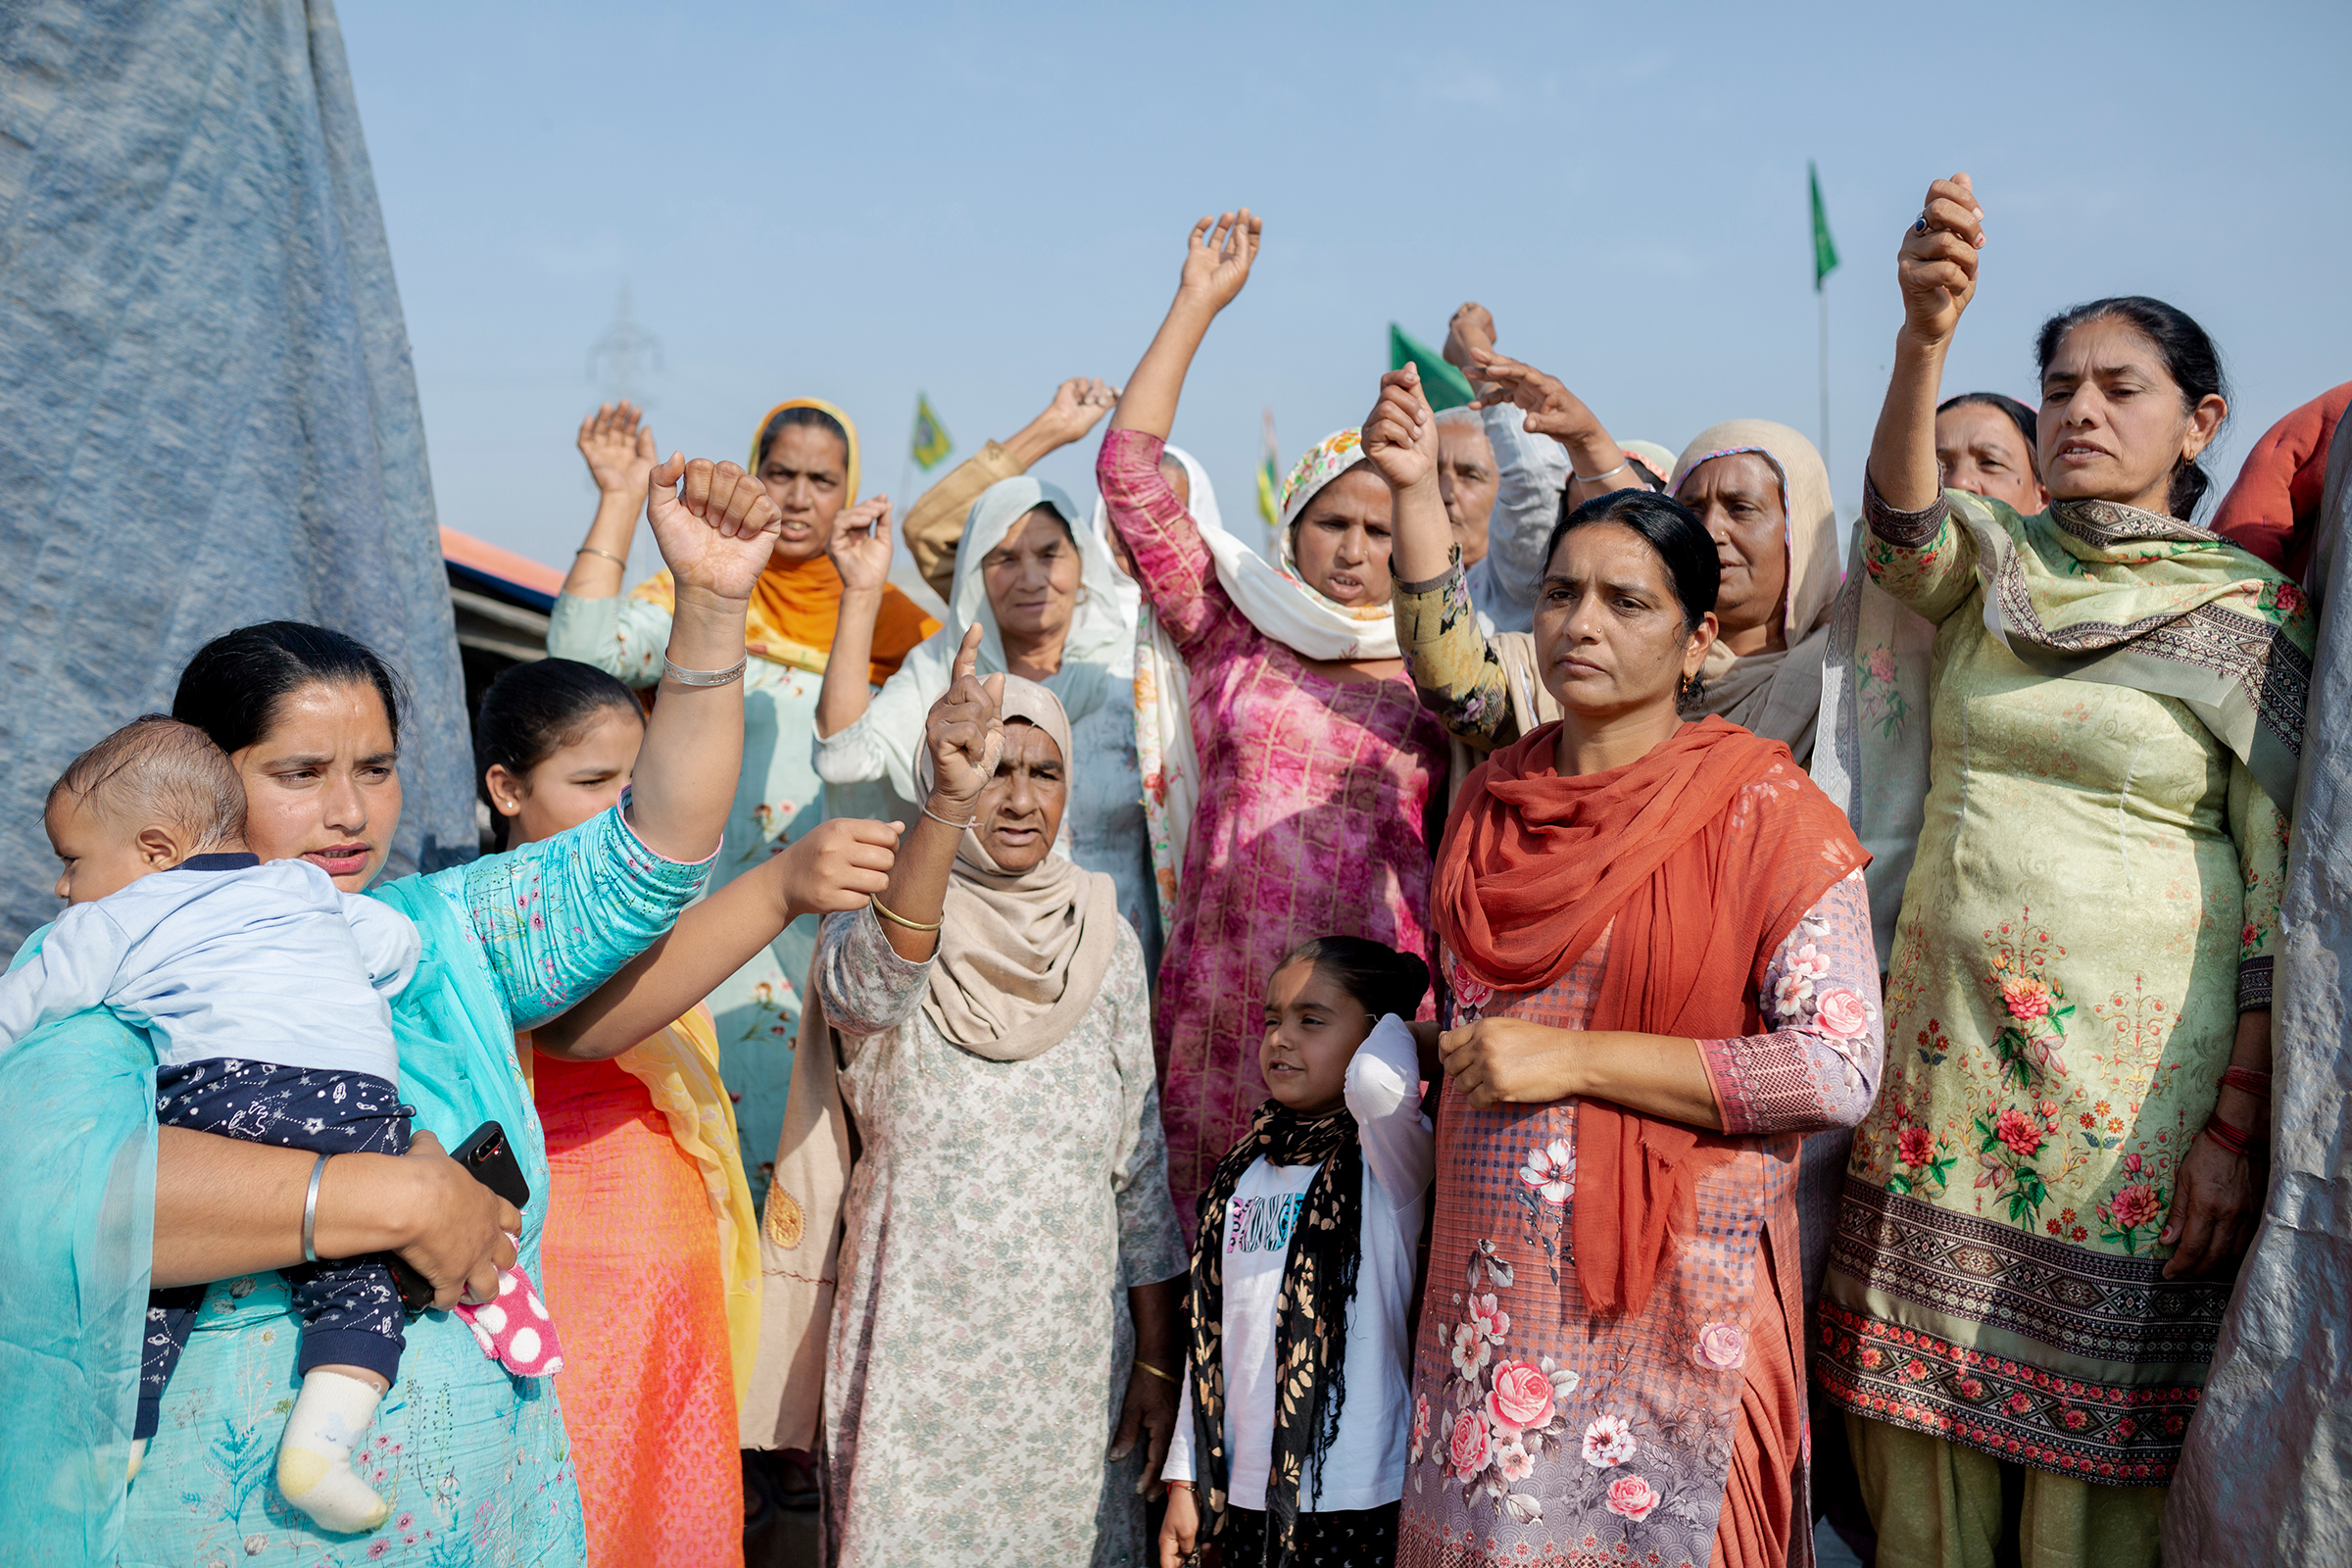 Kiranjit Kaur, far left, came to the Tikri protest site from Talwandi, Punjab, on Feb. 23 with a group of 20 women, including her mother-in-law and children. “It is important for all women to come here and mark their presence in this movement. I have two daughters, and I want them to grow up into the strong women they see here.” (Kanishka Sonthalia for TIME)